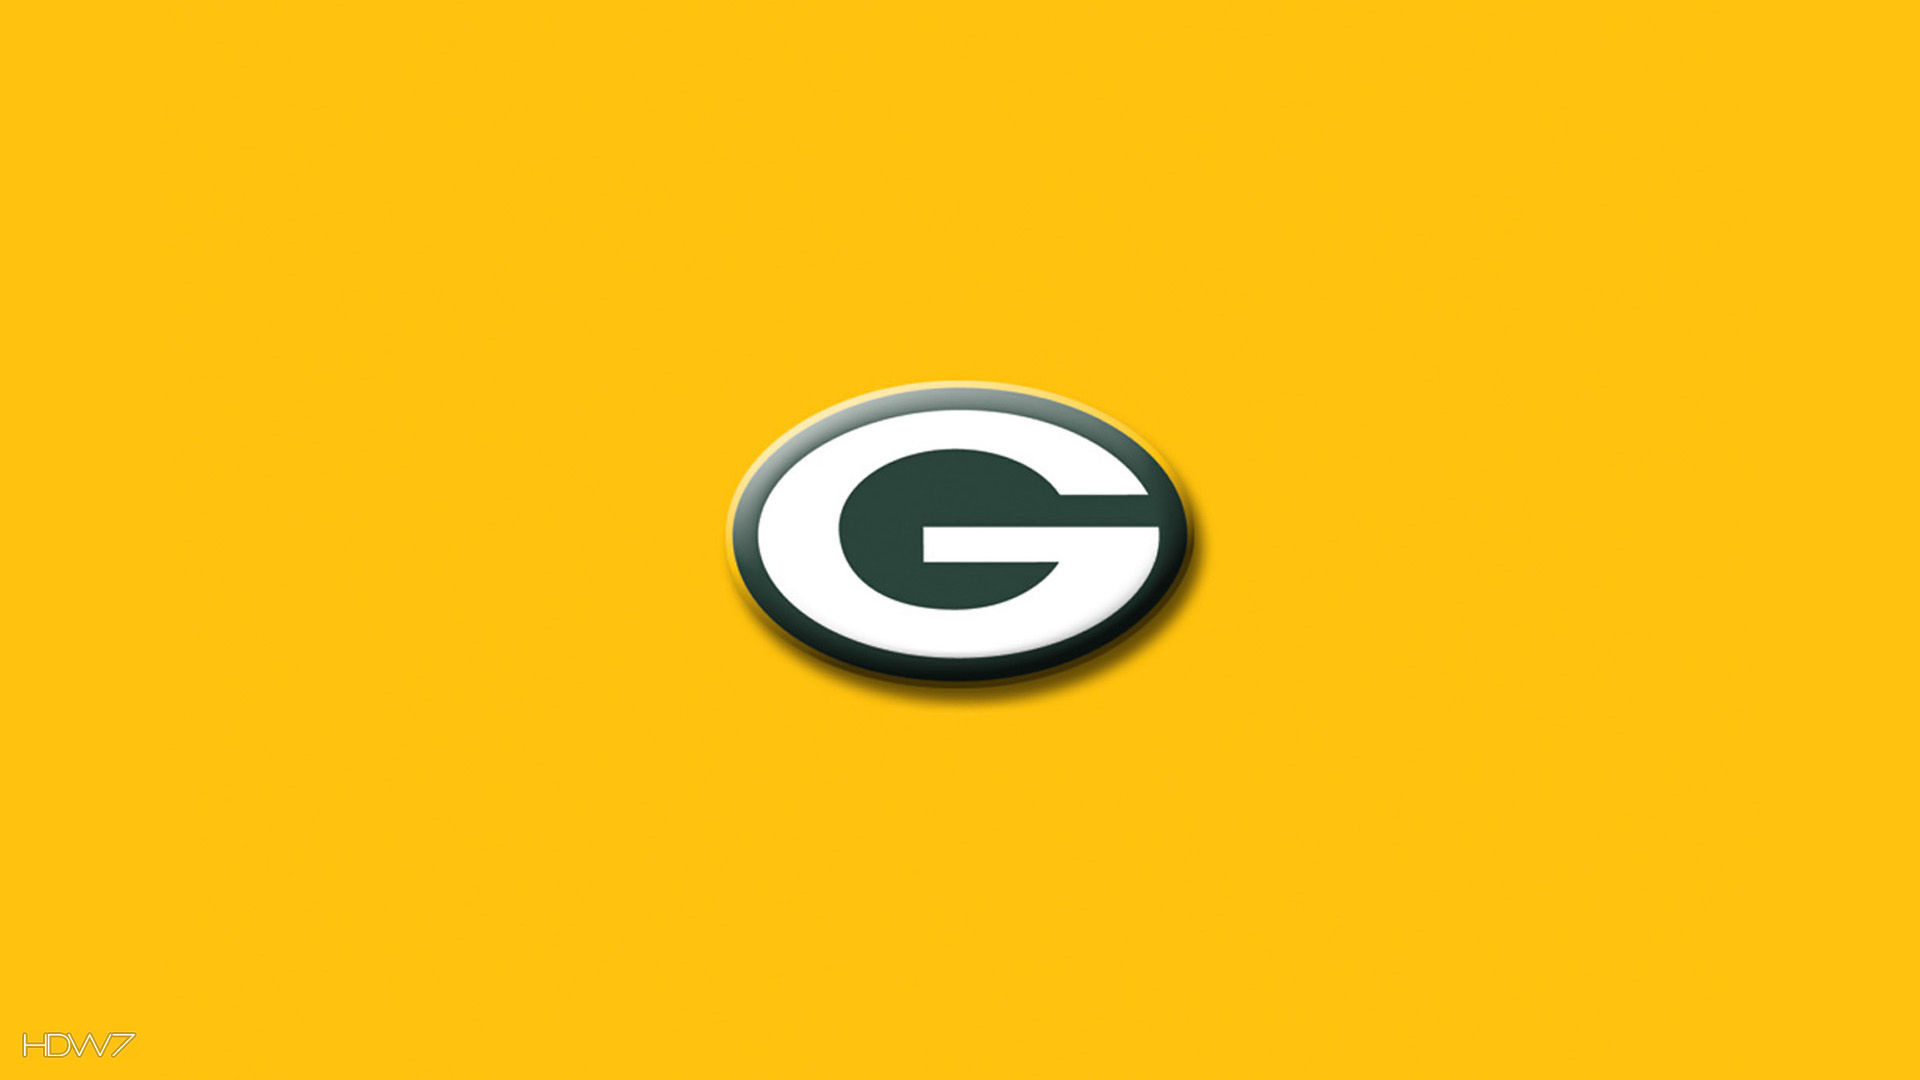 1920x1080 Images green bay packers logo page 4